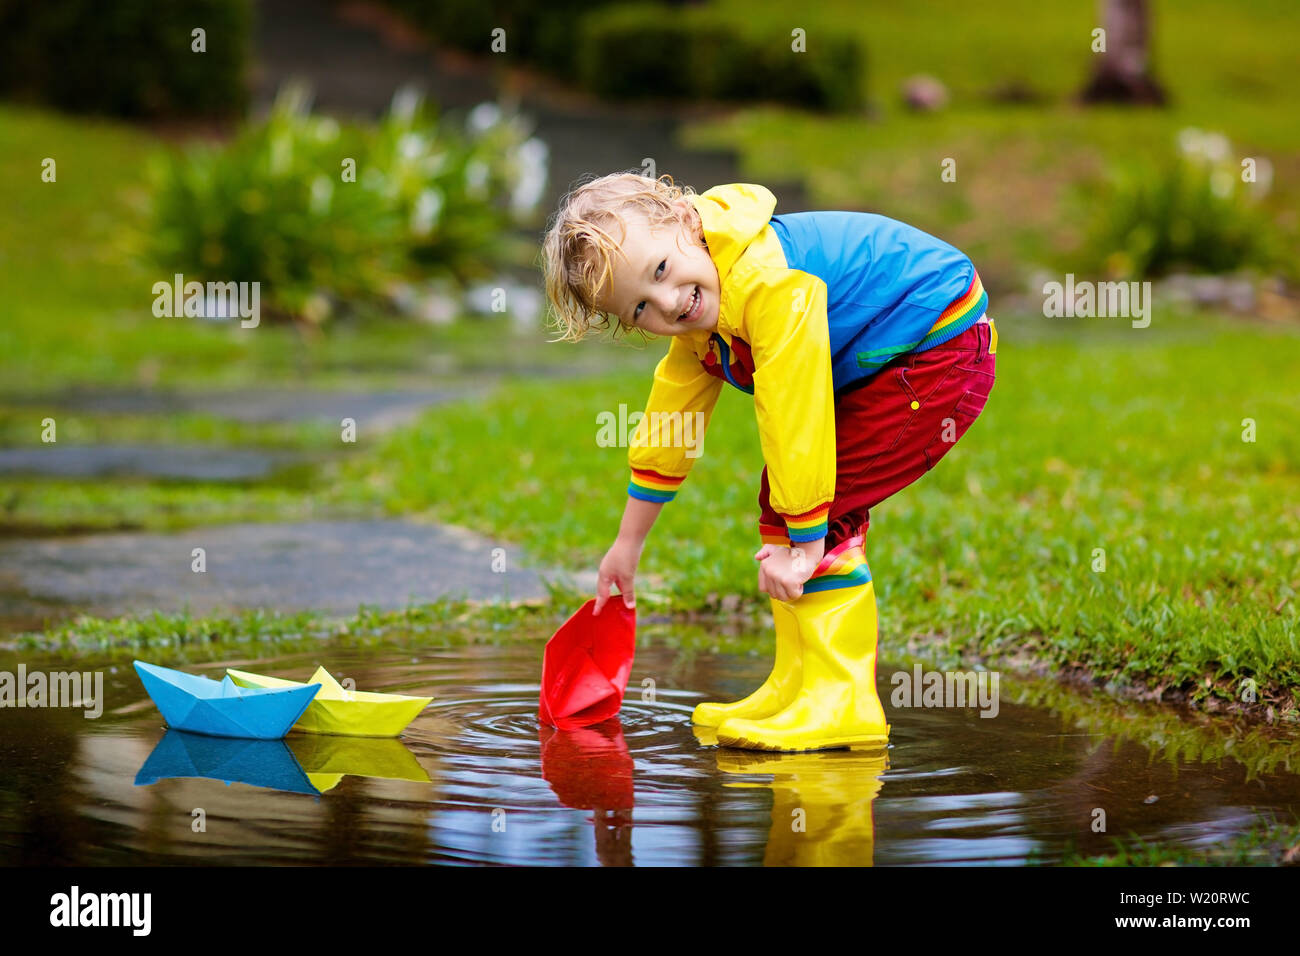 Child playing with paper boat in puddle. Kids play outdoor by ...